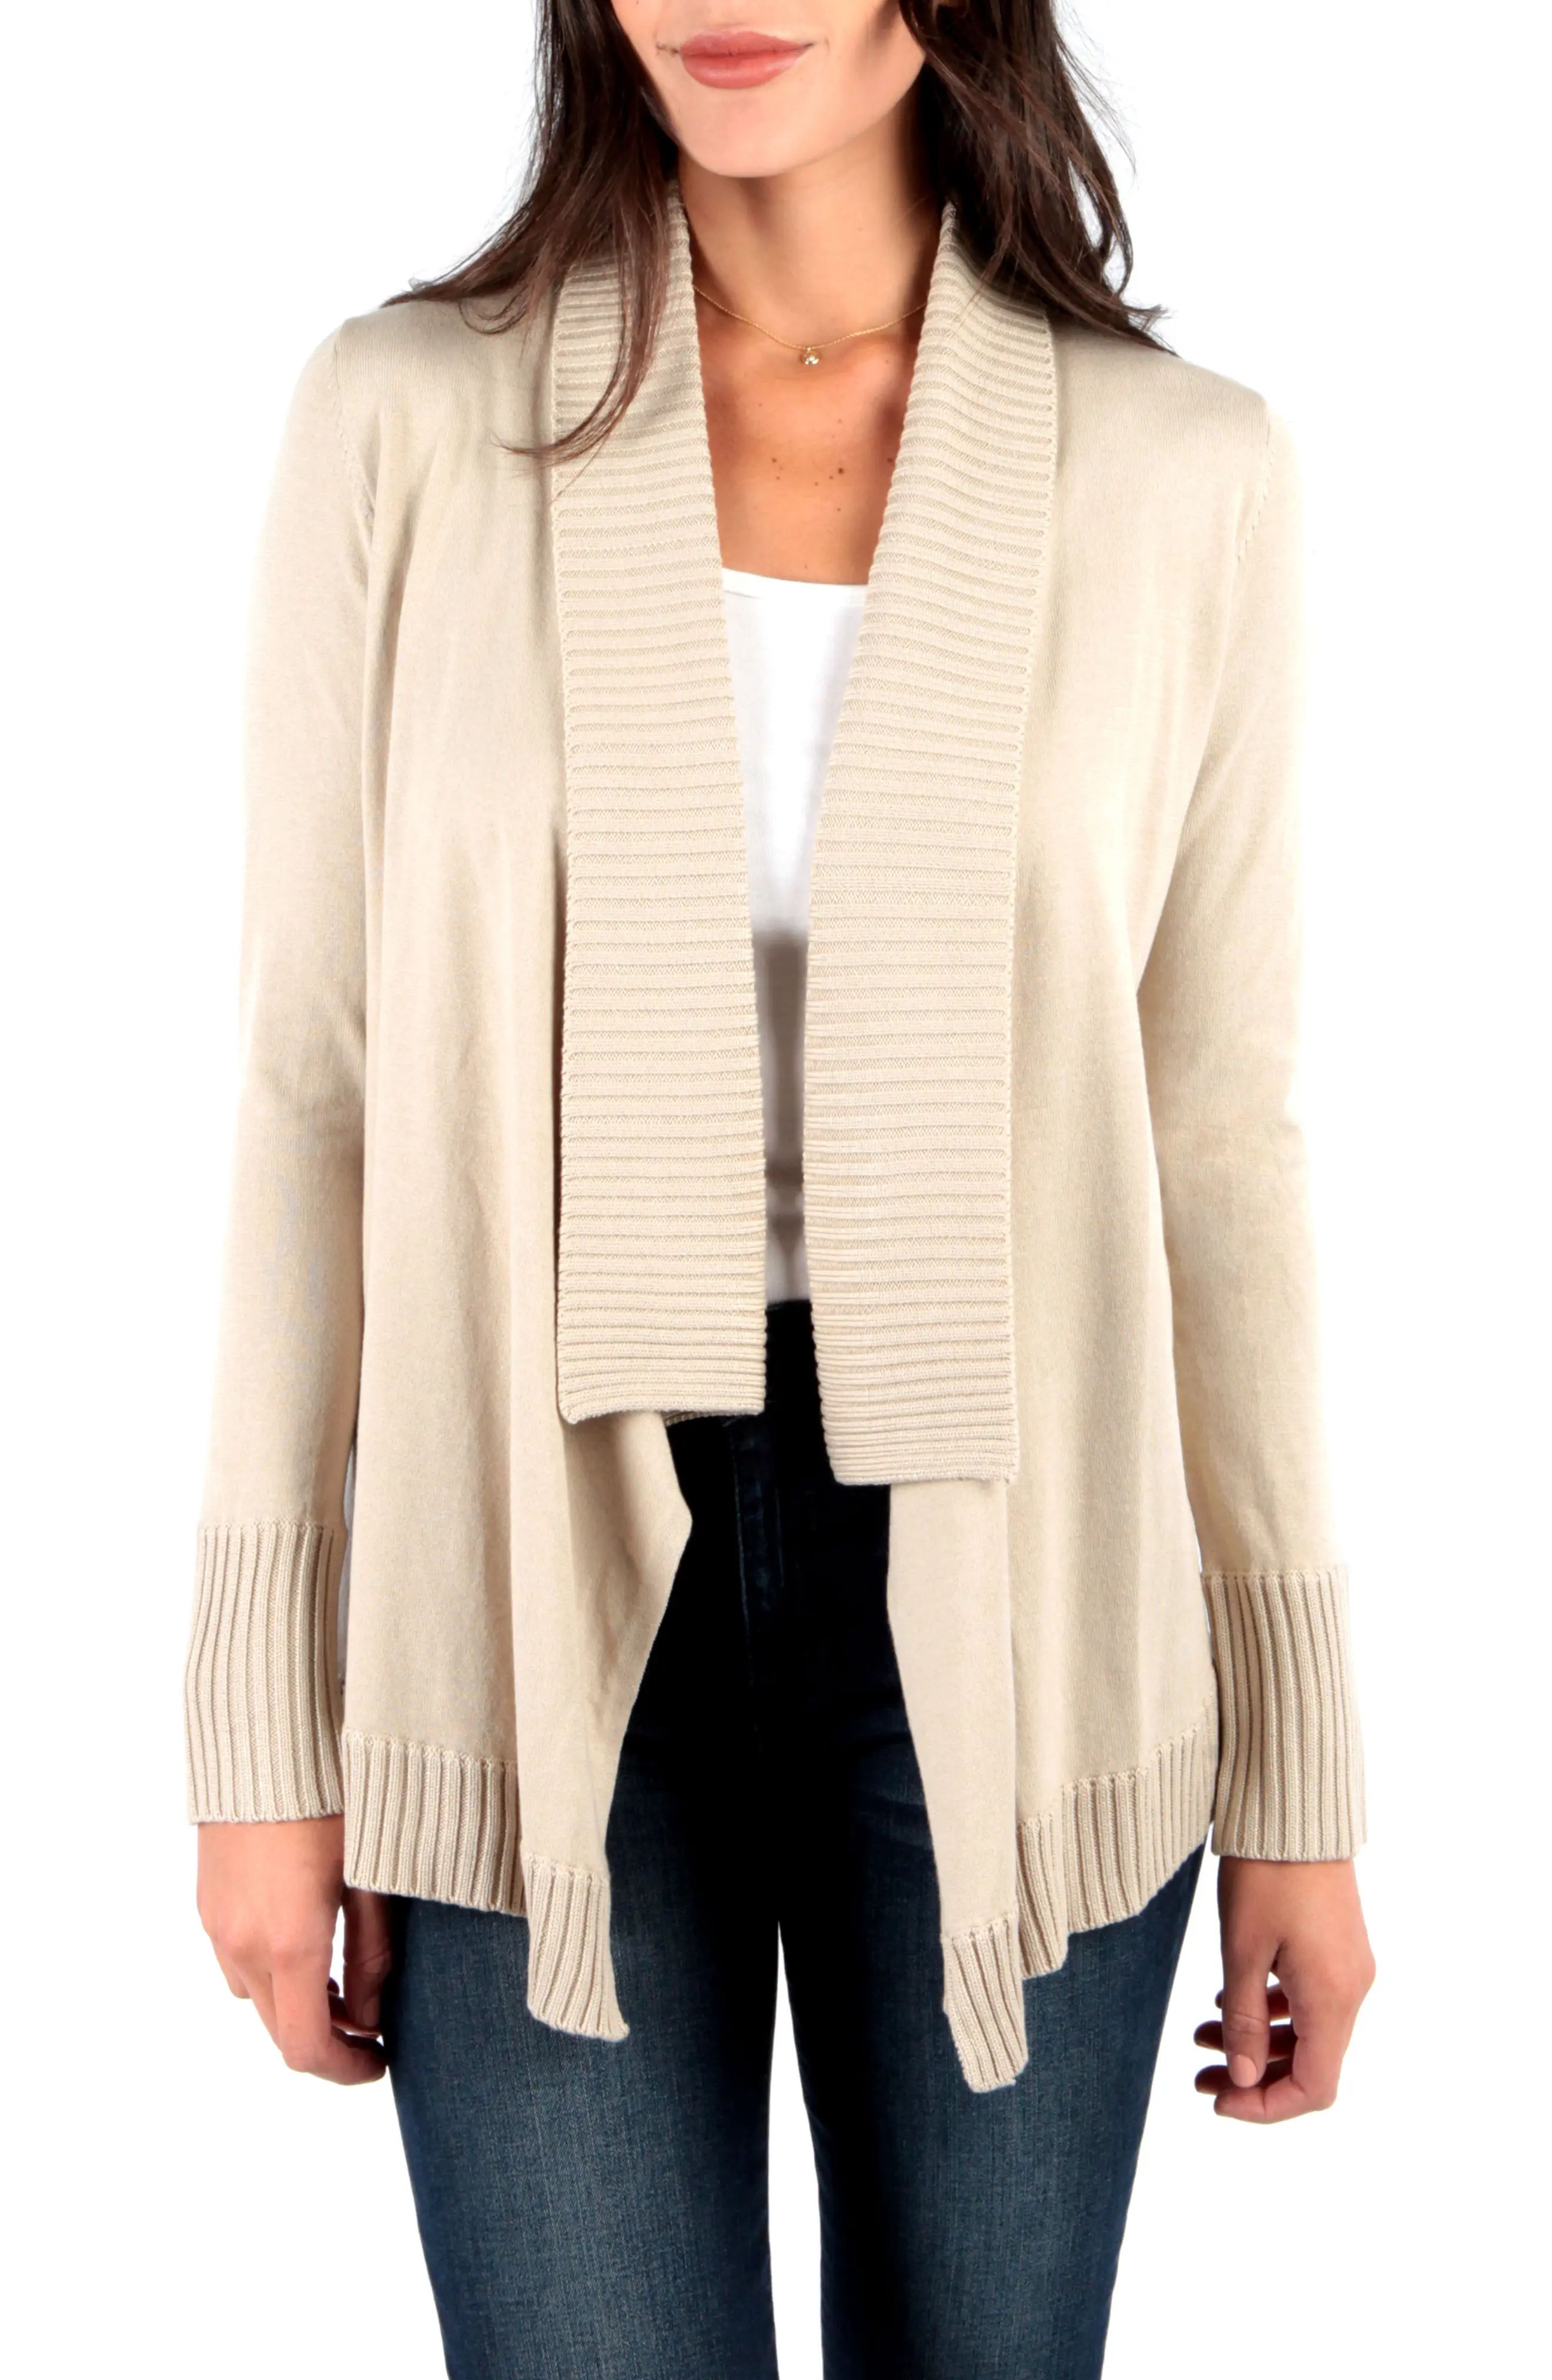 Kut from the Kloth Amabelle Knit Cardigan | Nordstrom